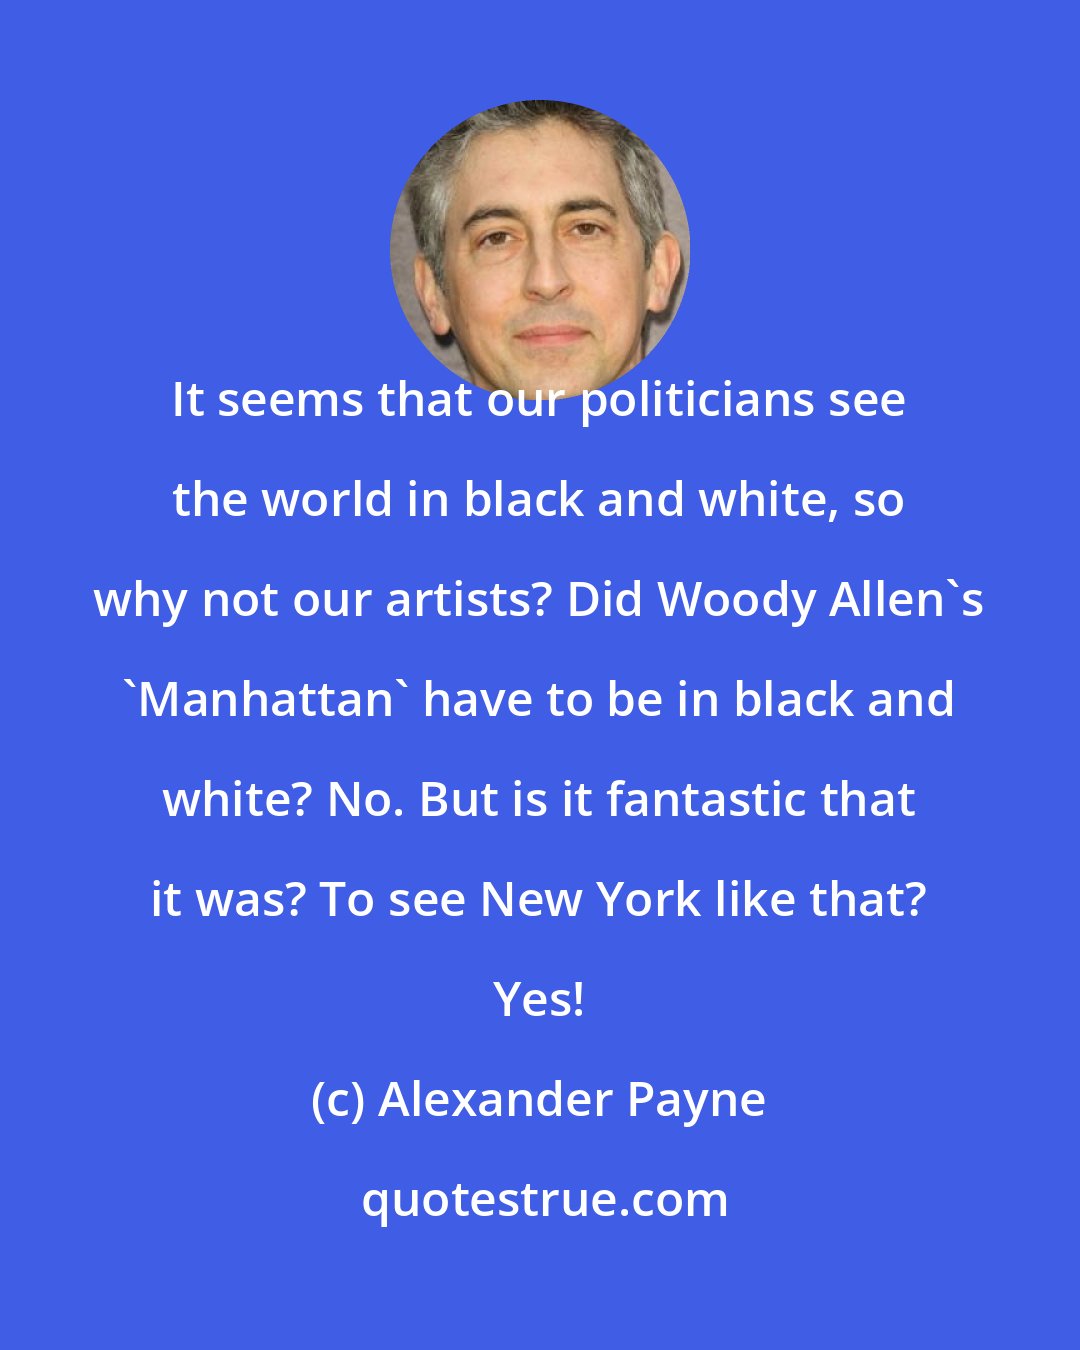 Alexander Payne: It seems that our politicians see the world in black and white, so why not our artists? Did Woody Allen's 'Manhattan' have to be in black and white? No. But is it fantastic that it was? To see New York like that? Yes!